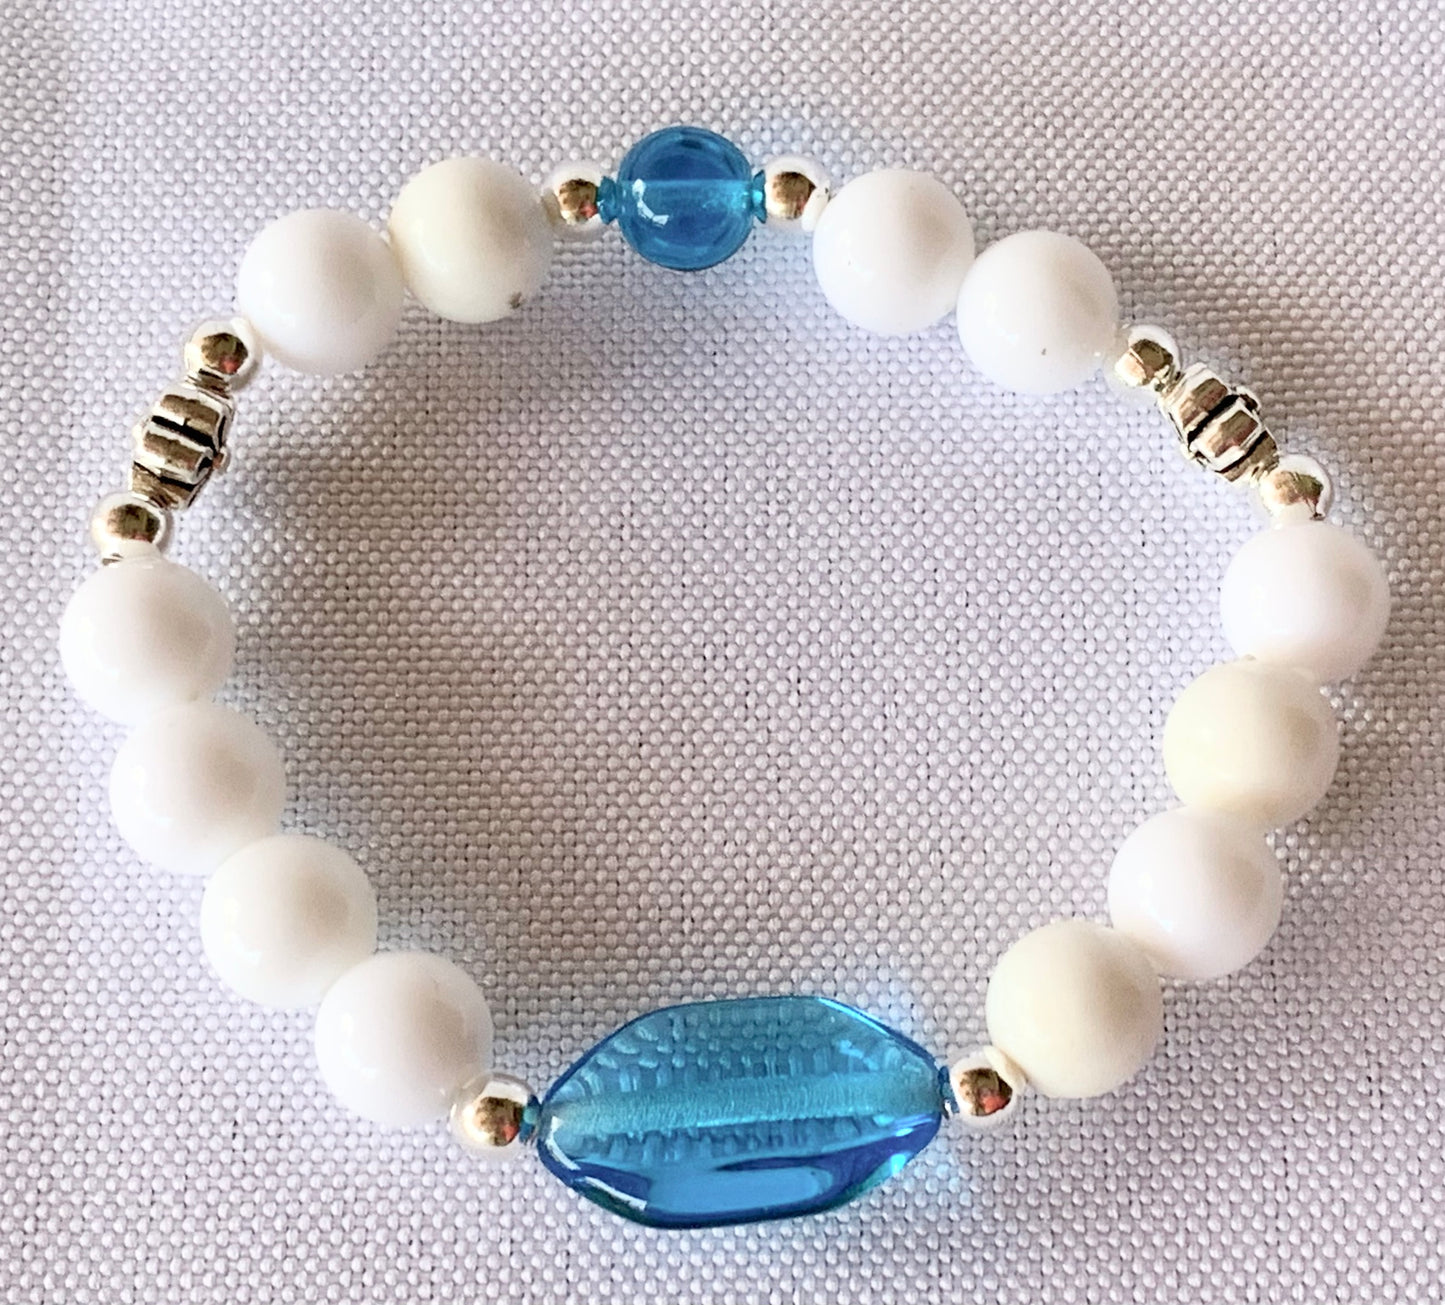 Alicia Handmade Acrylic and Glass Beaded Expandable 6" Bracelet with Silver spacer beads for Kids 4-8 Years Old